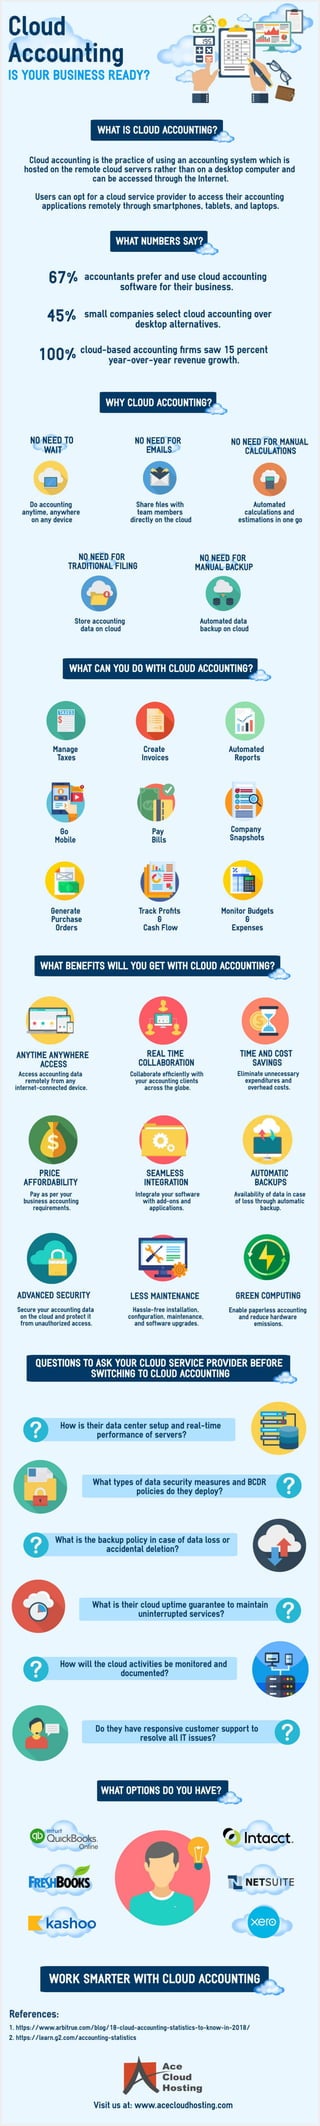 Cloud Accounting Infographic